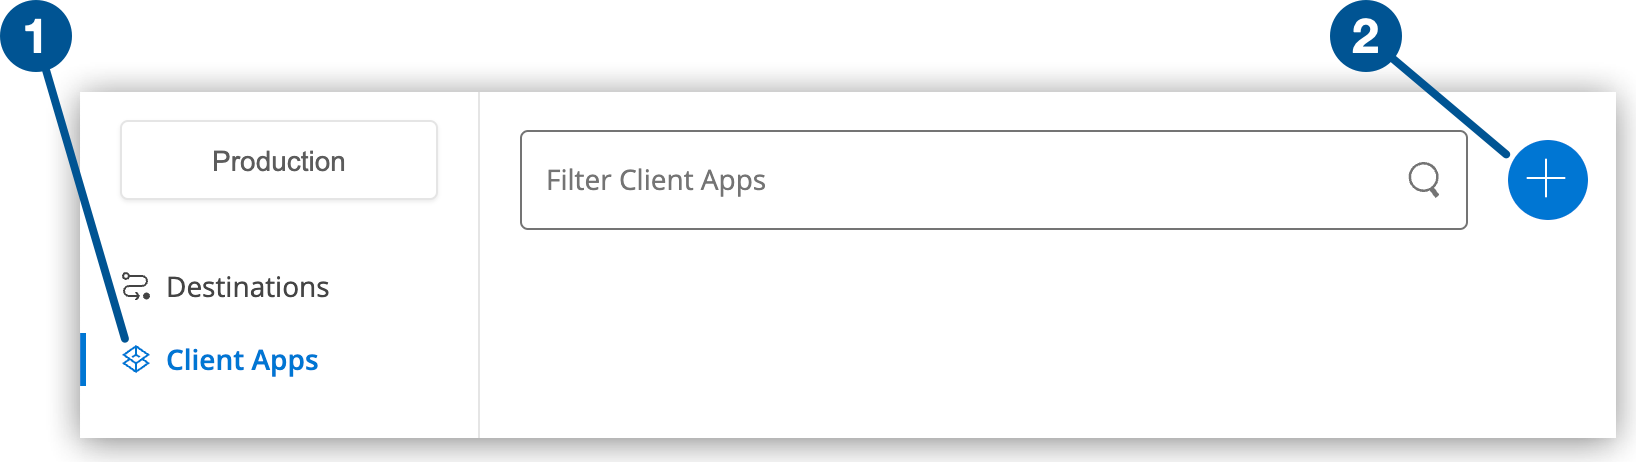 Client Apps option and blue plus icon